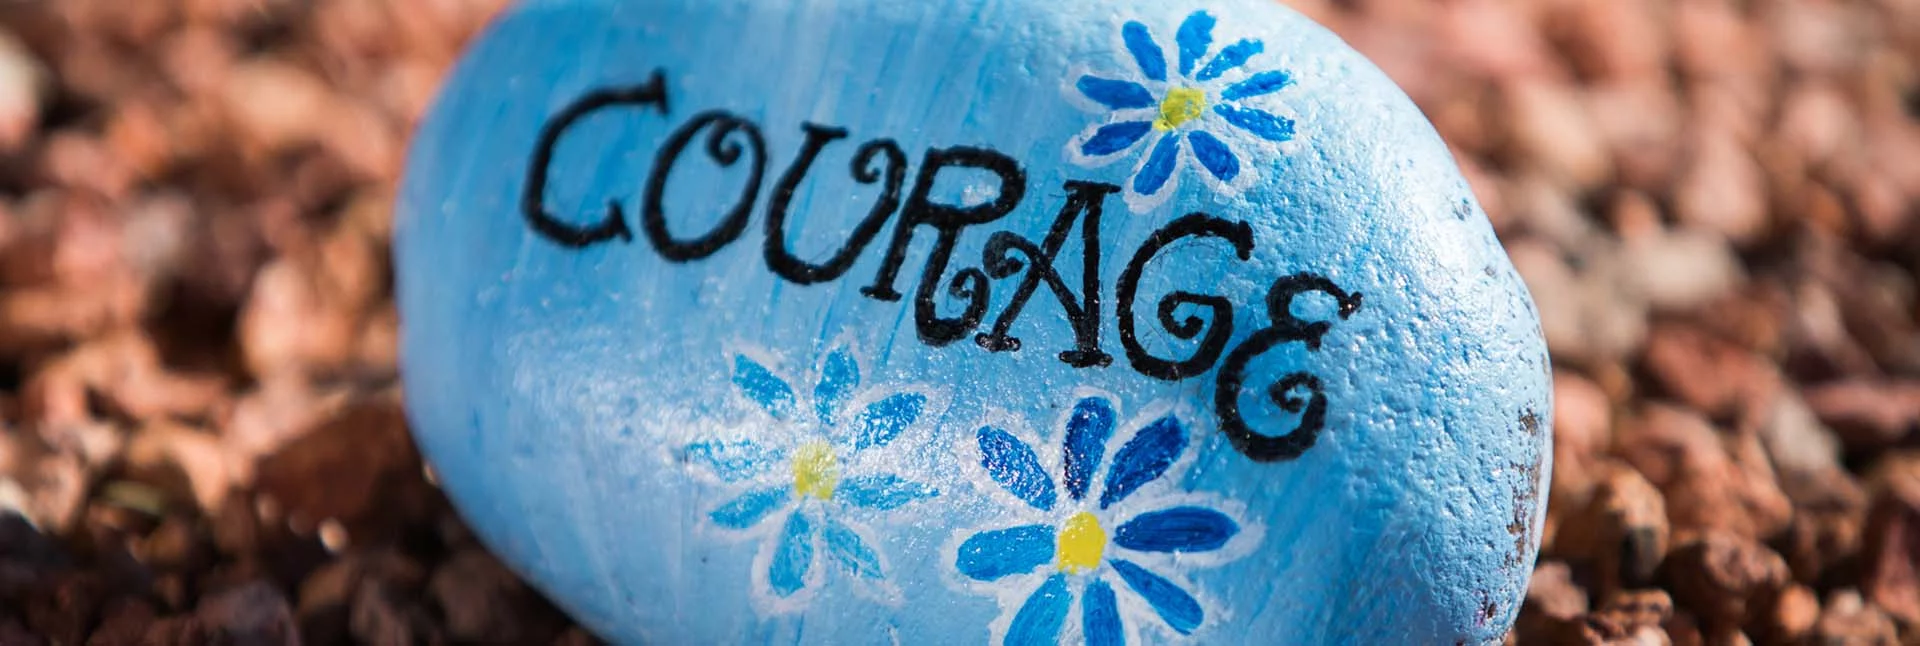 Courage painting on stone